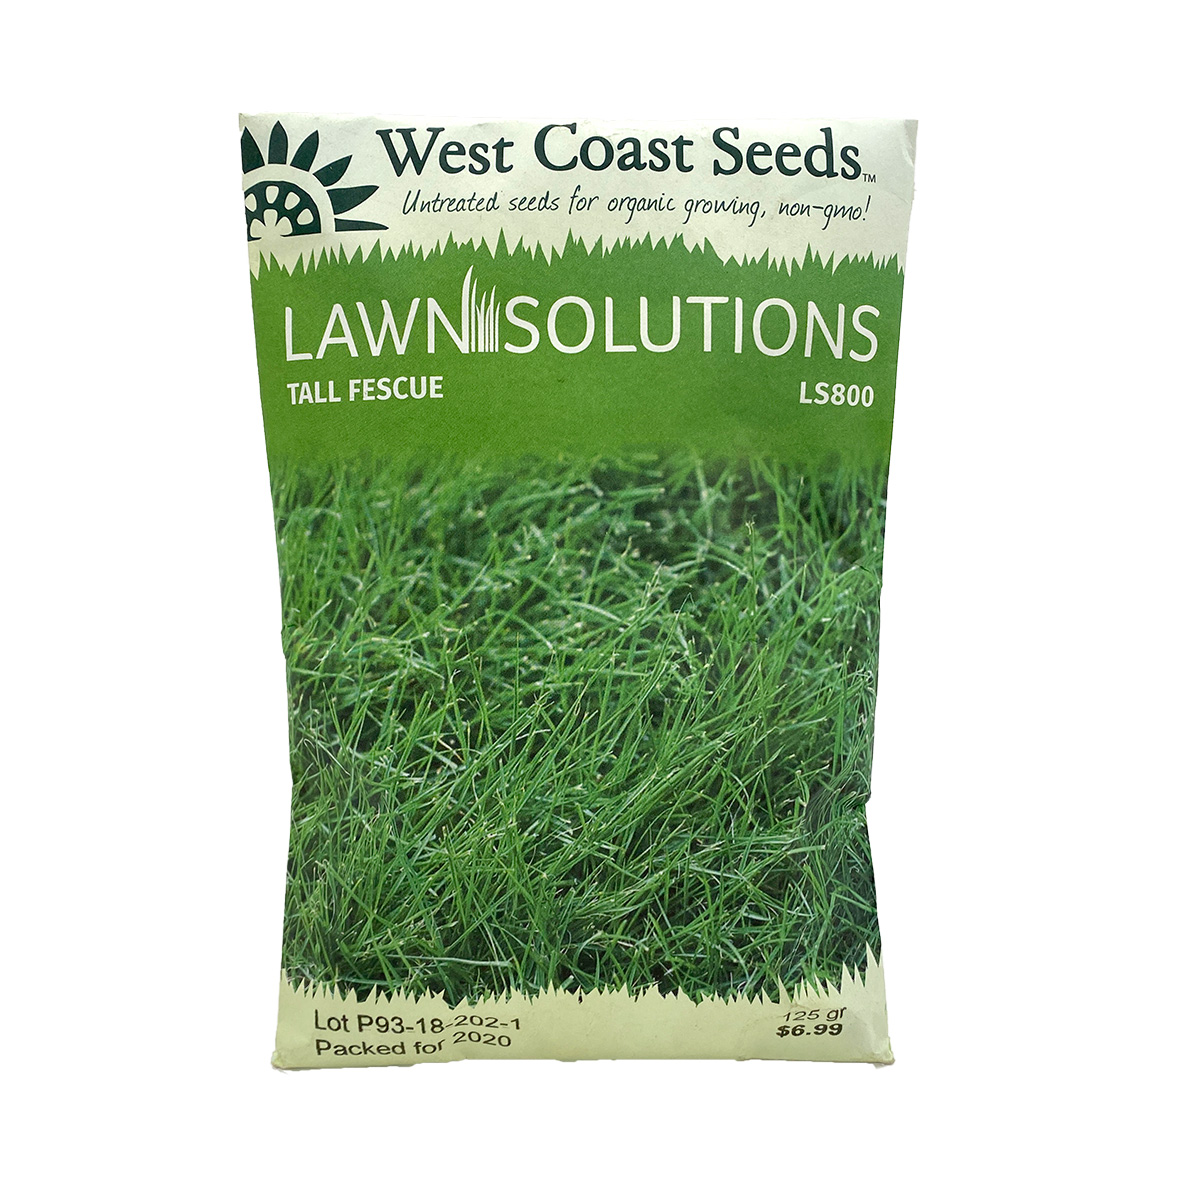 Lawn Solutions Tall Fescue 125g